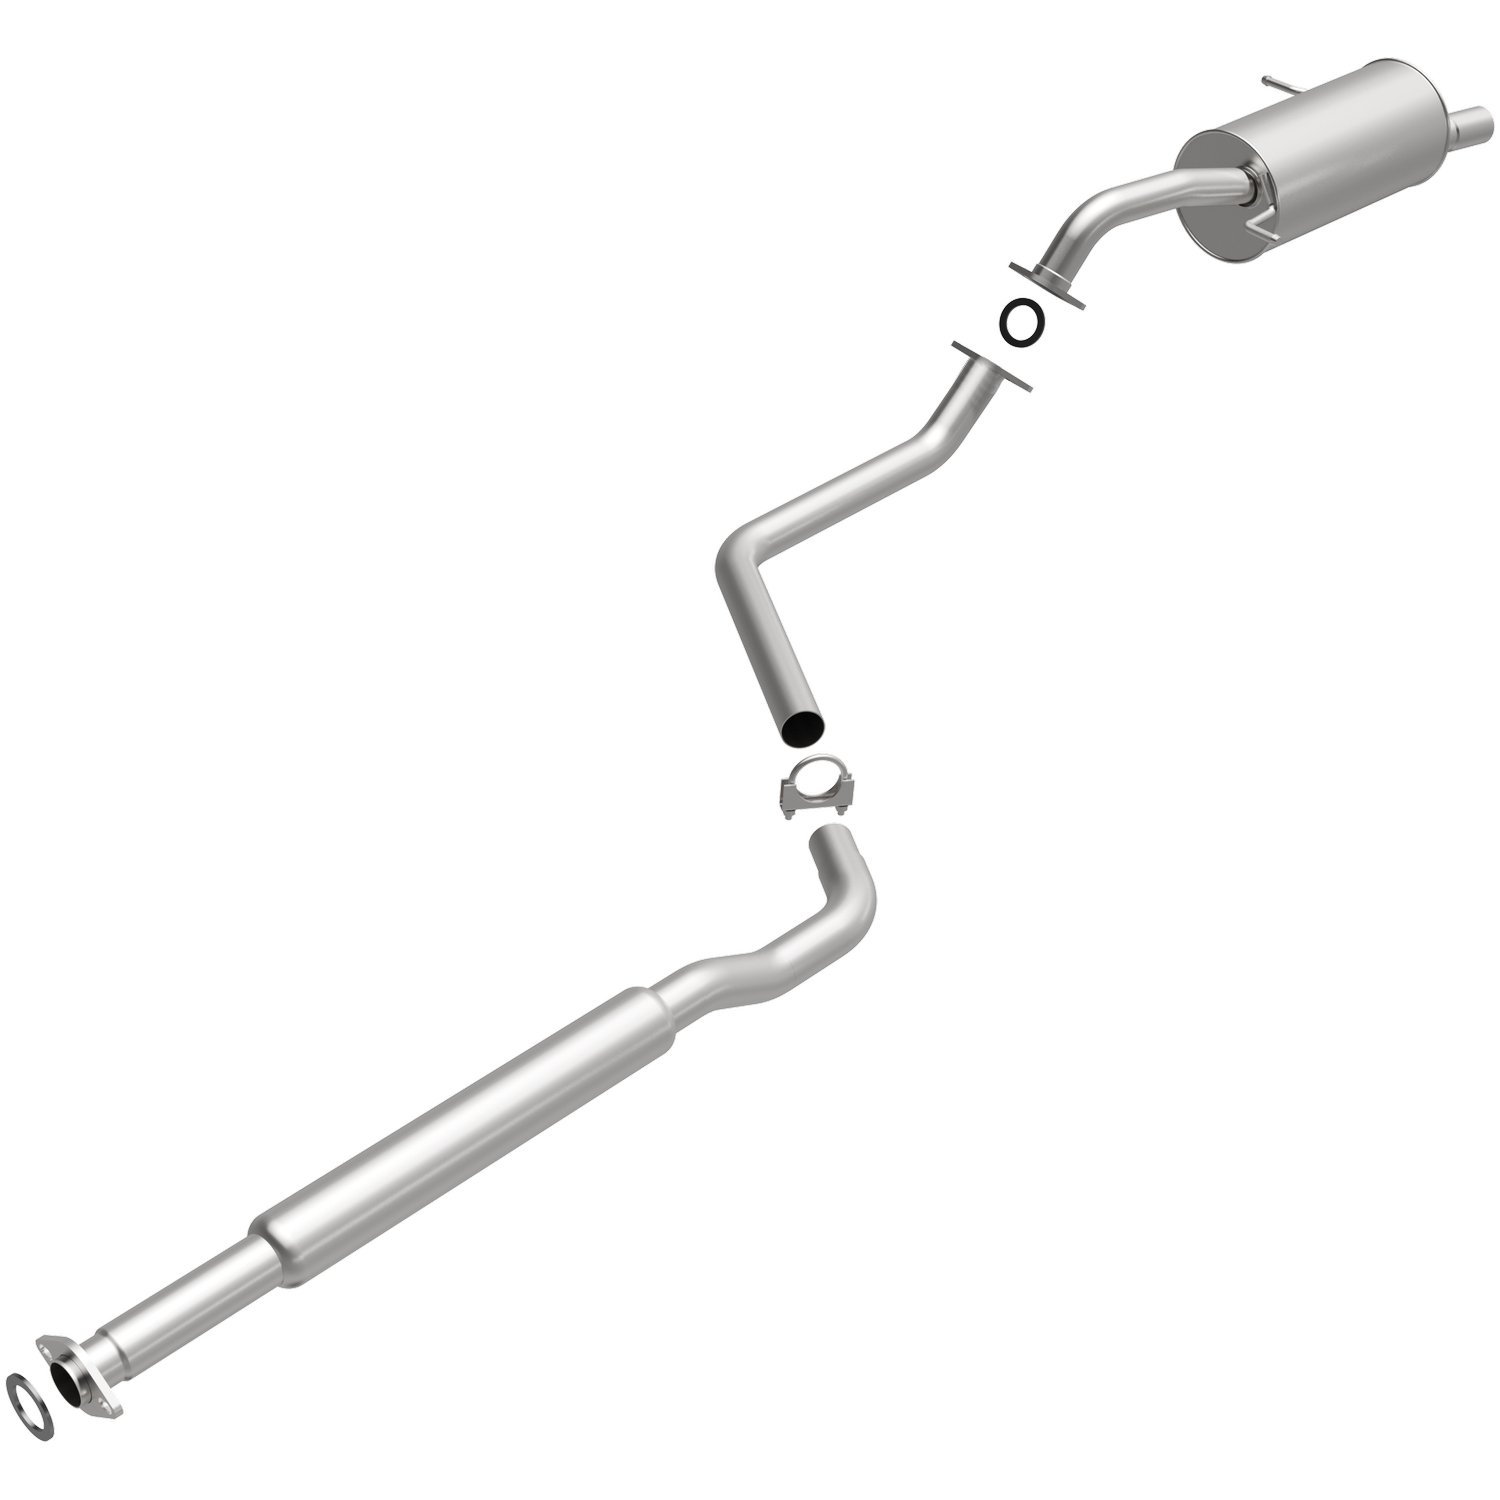 Direct-Fit Exhaust Kit, 2002-2003 Mazda Protege5 2.0L